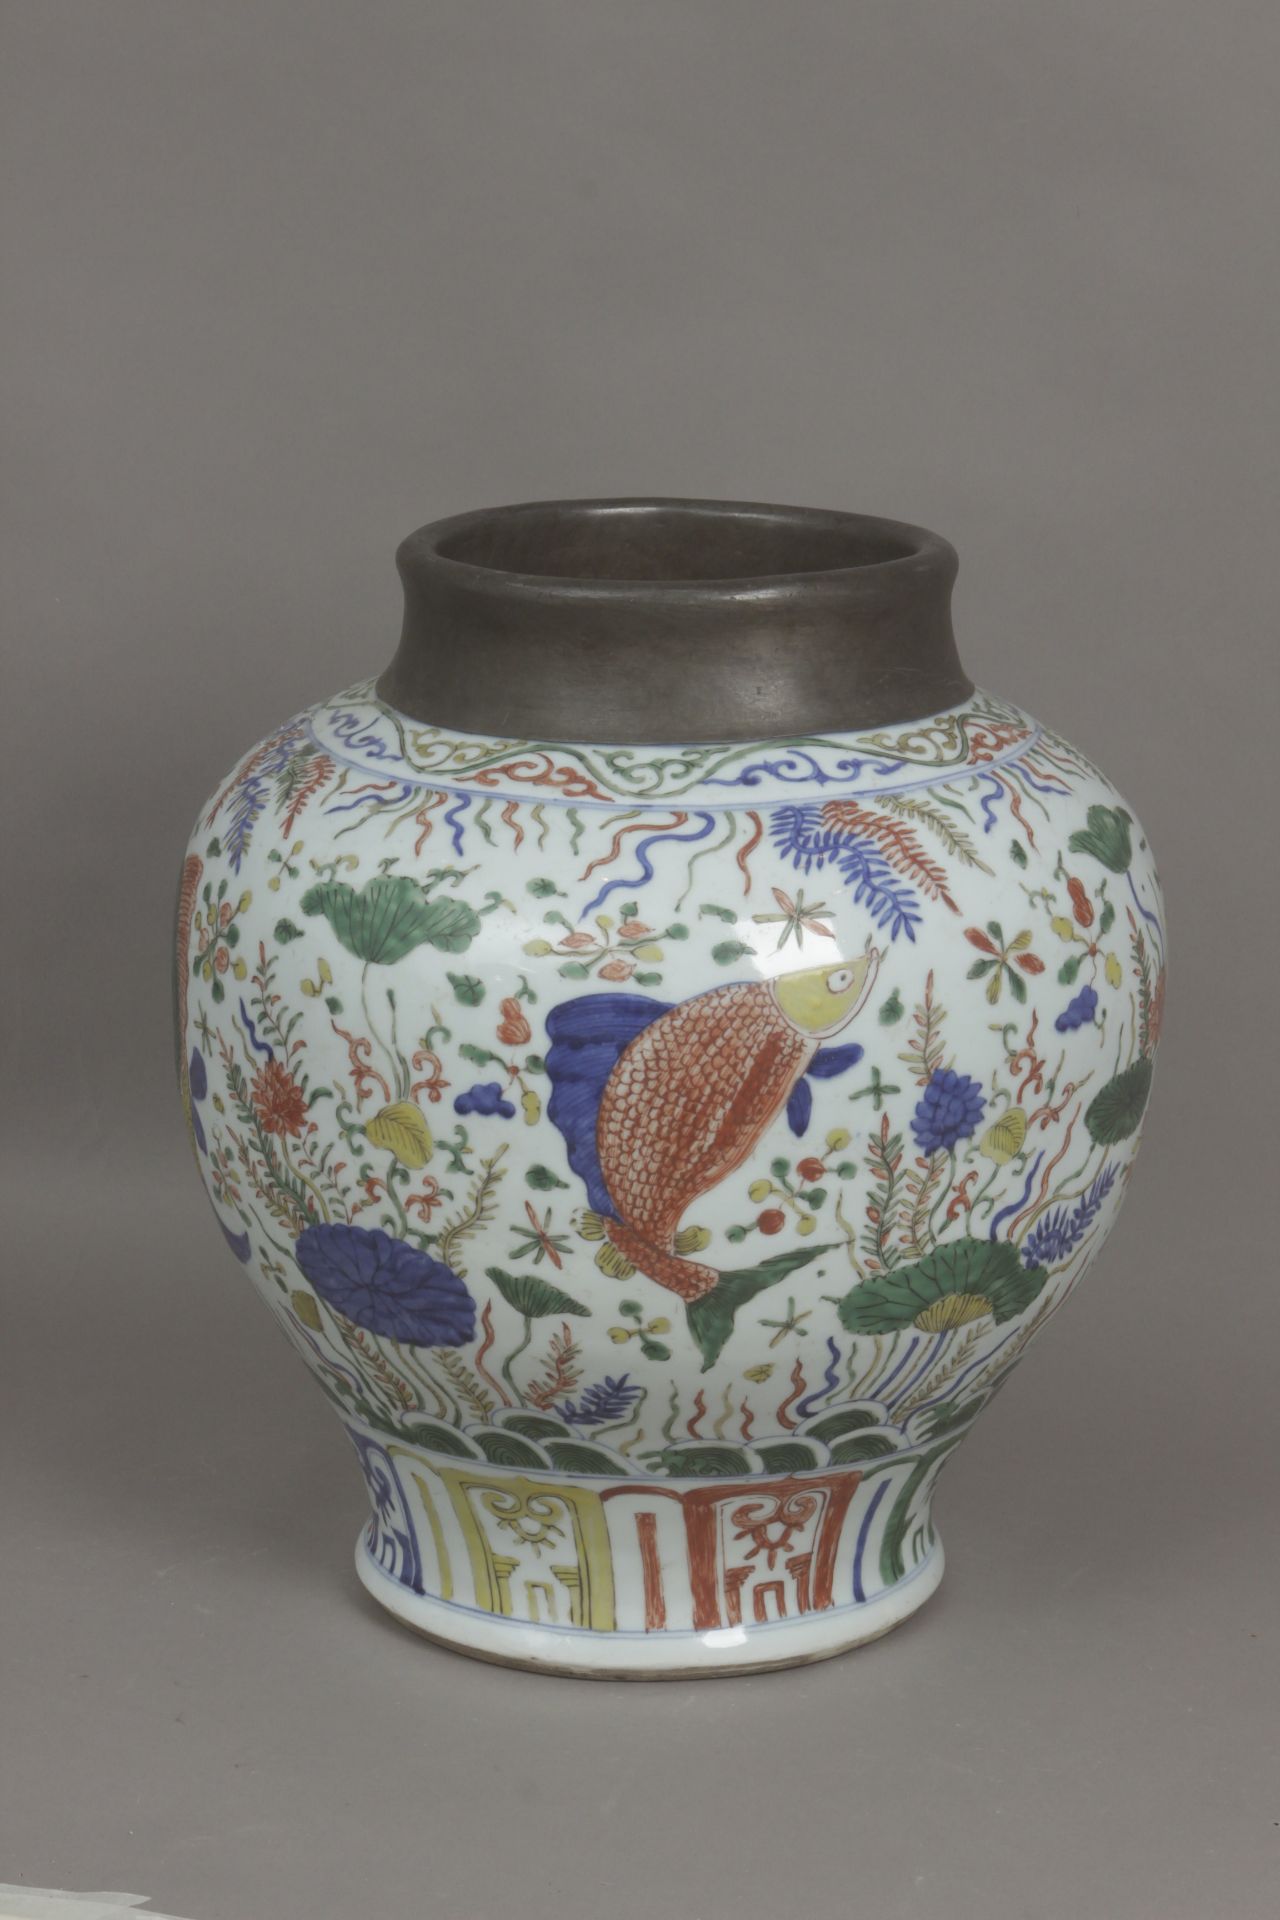 An early 20th century Chinese vase in Doucai porcelain - Image 3 of 5